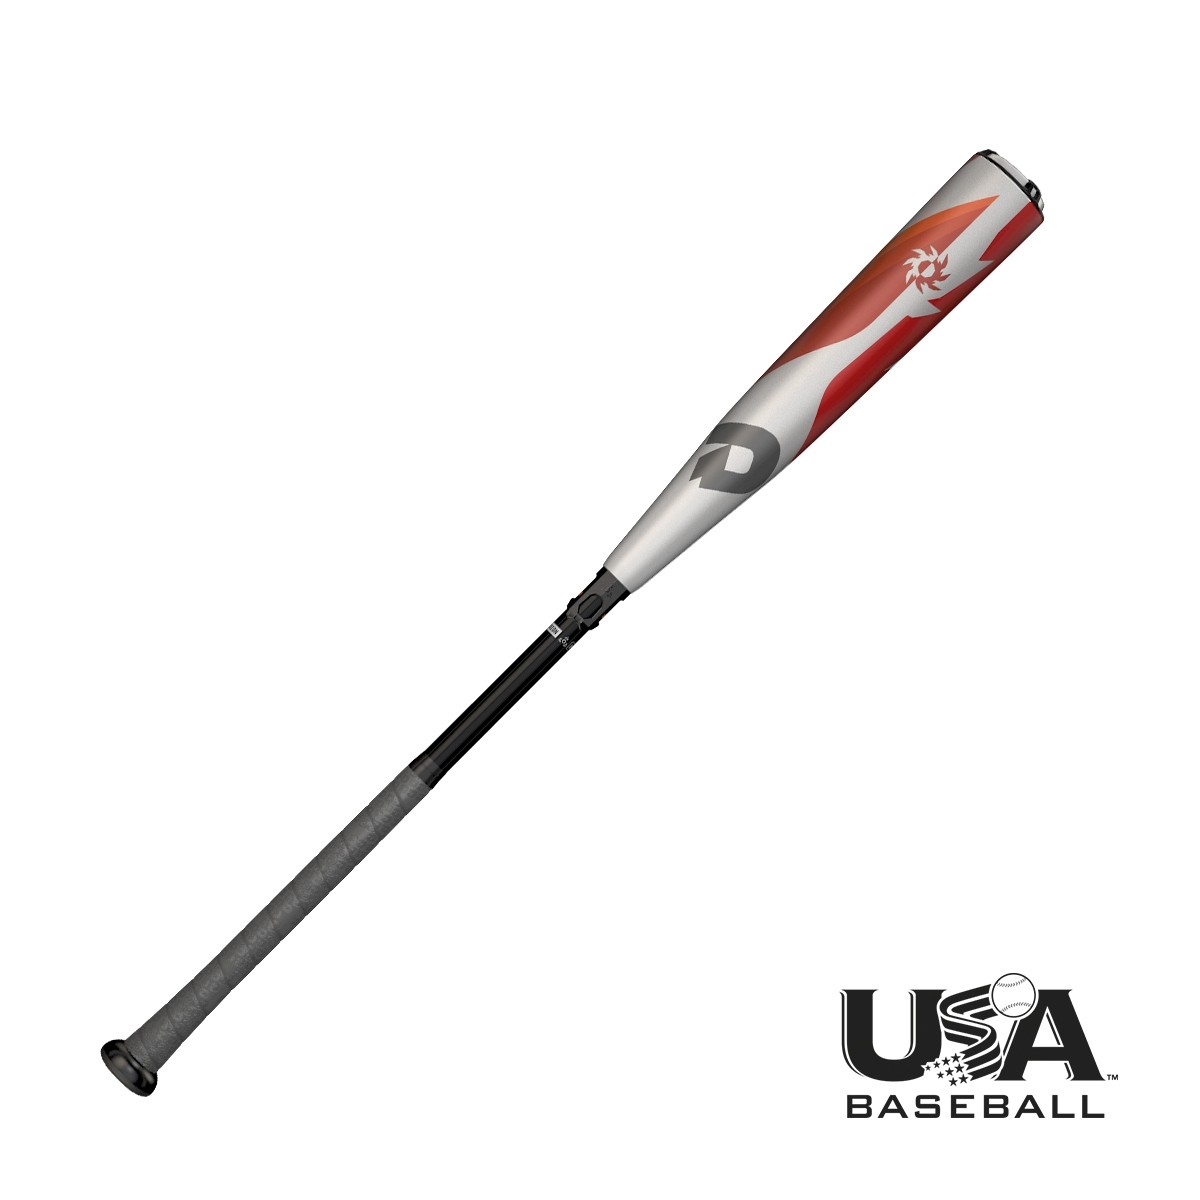 Following along with the new usa baseball standards, the newest line of bats for little leaguers are coming. Demarini is meeting this new wave with the voodoo drop 10 wtdxud2-18. The larger 2 and 5/8 inch barrel will help young players make more contact with the bat. This ultimately leads to more success at the plate. The ball itself won't fly off the bat with greater velocity but instead the sweet spot is larger producing many more hits and improving the confidence of the batter.   X14 alloy for more precise weight distribution 3Fusion handle for greater weight control and feel 3Fusion end cap optimizes sweet spot, sound and feel through the barrel Meets new USA Baseball standard 1-year Warranty